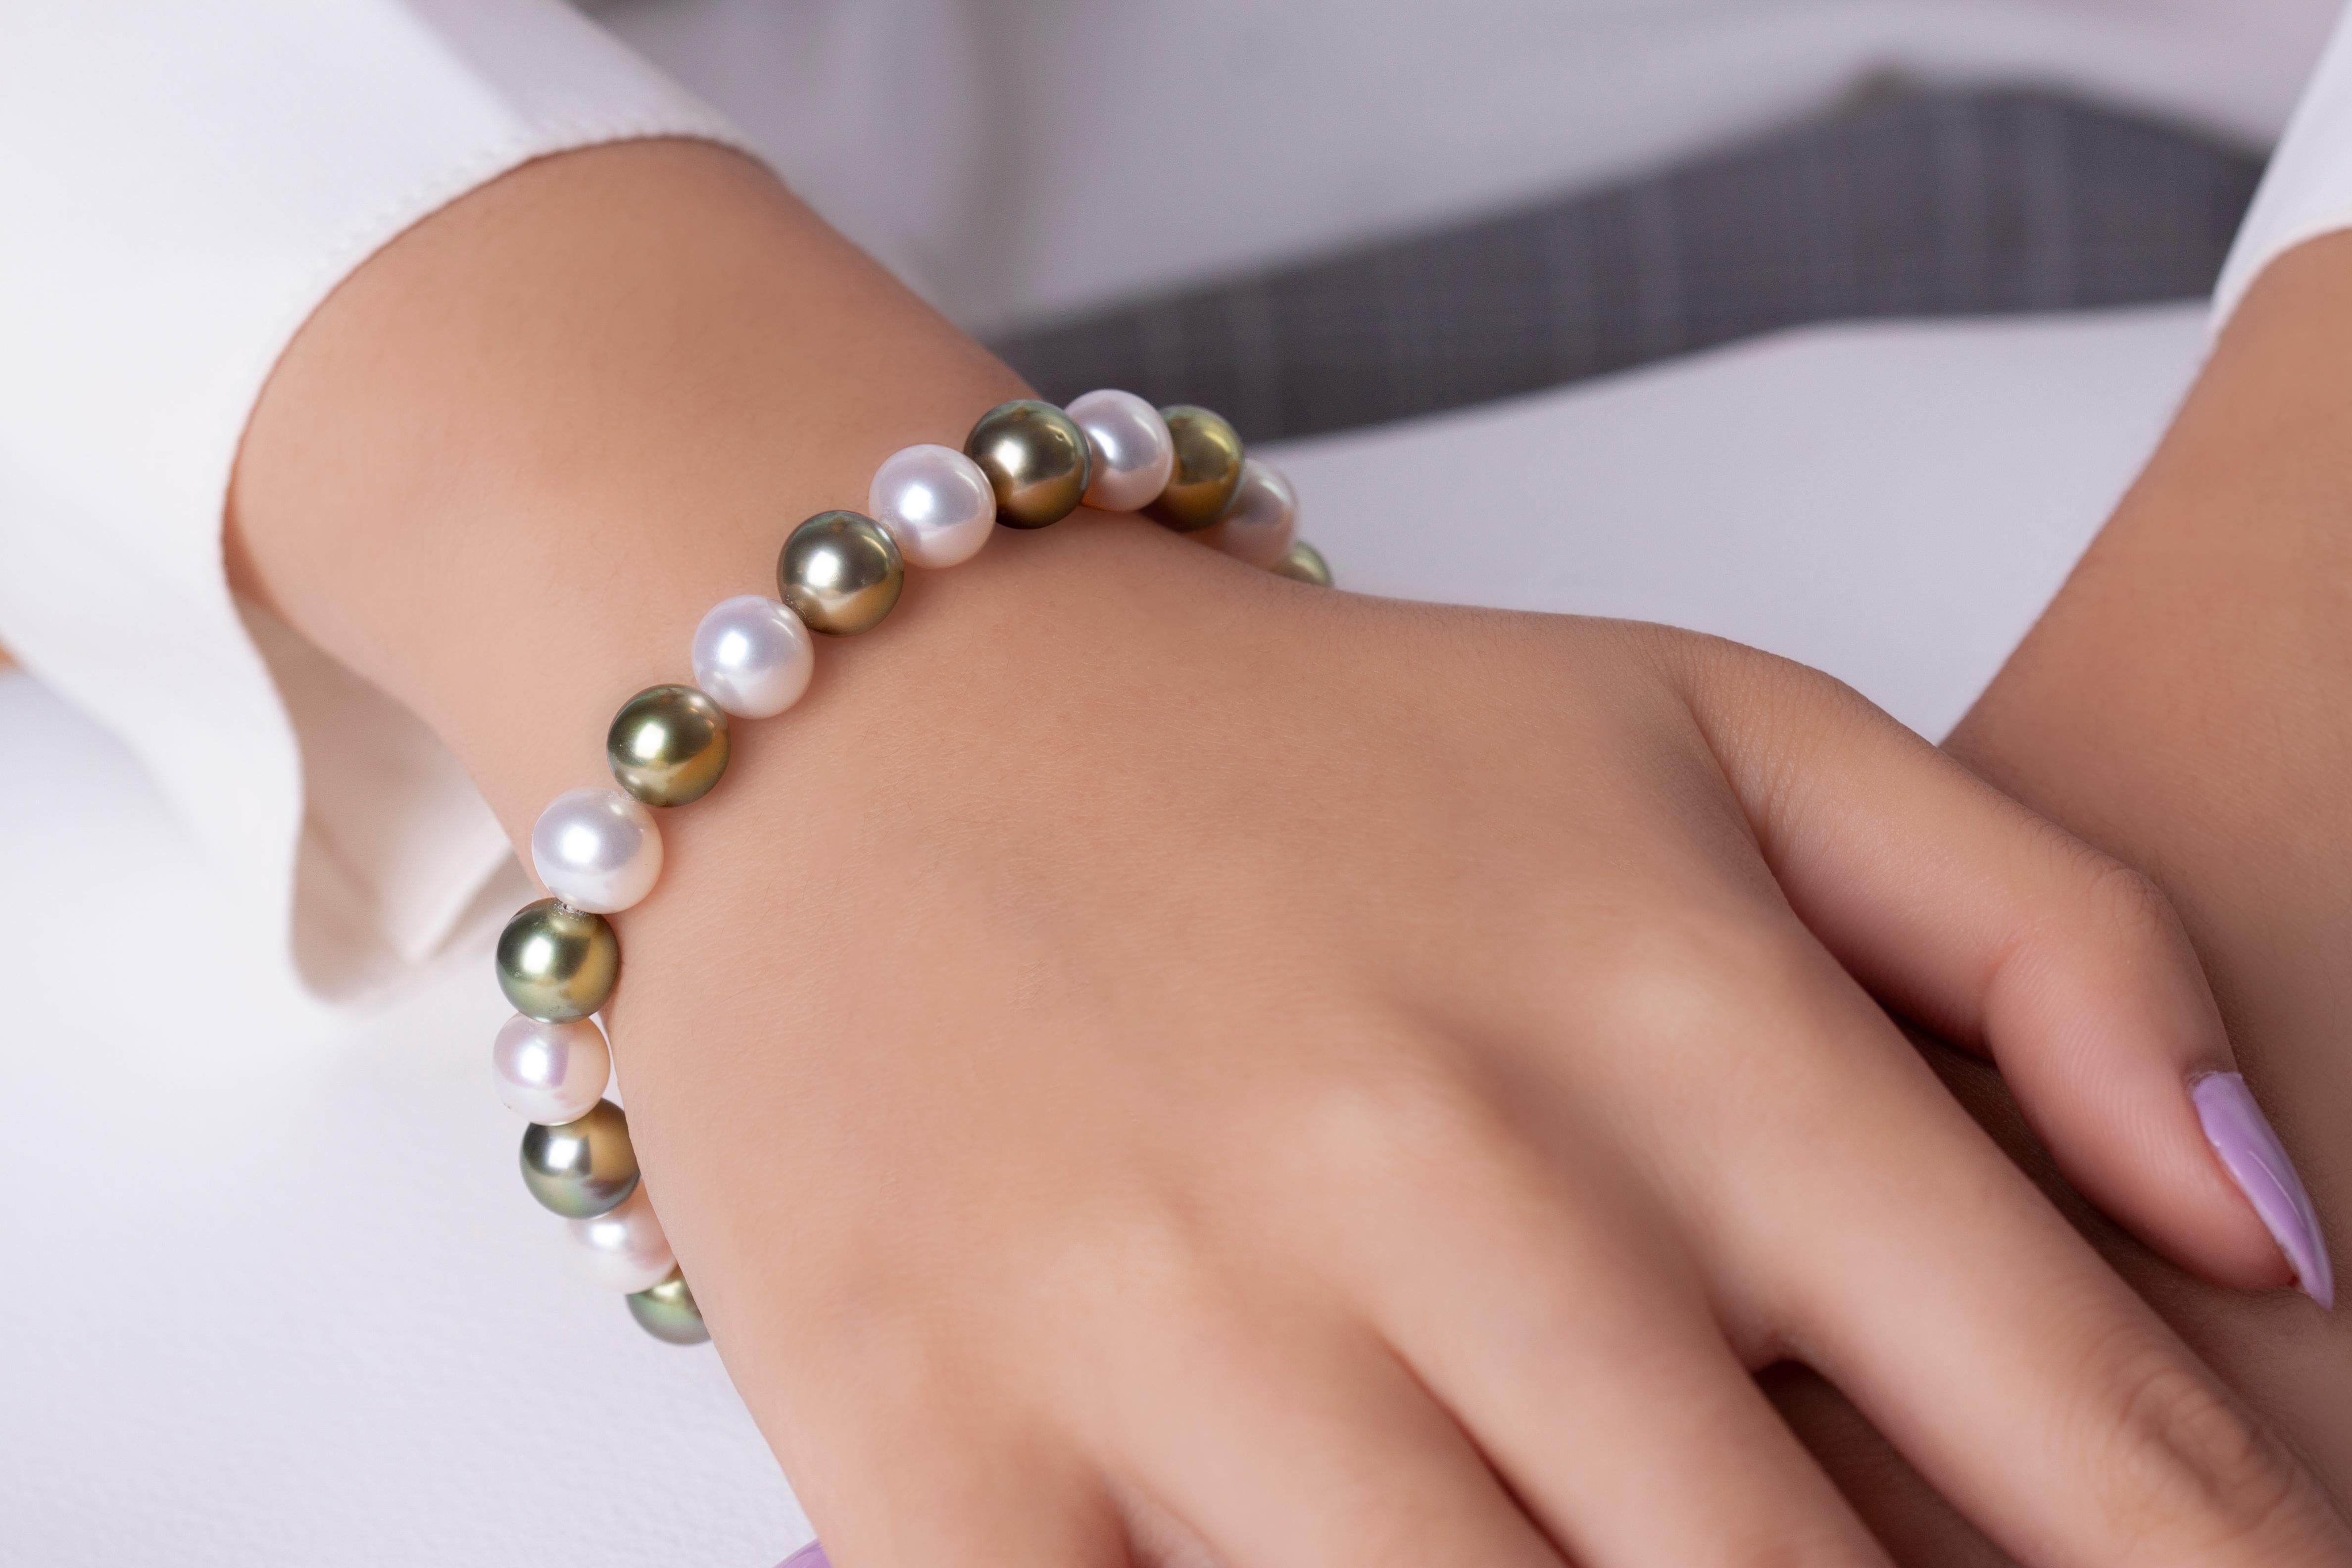 This unusual bracelet by Yoko London features white and Pistachio 
This unusual bracelet from Yoko London features a row of 9mm alternating white Freshwater and Pistachio-Coloured Tahitian Pearls secured on elastic to allow for maximum comfort. To